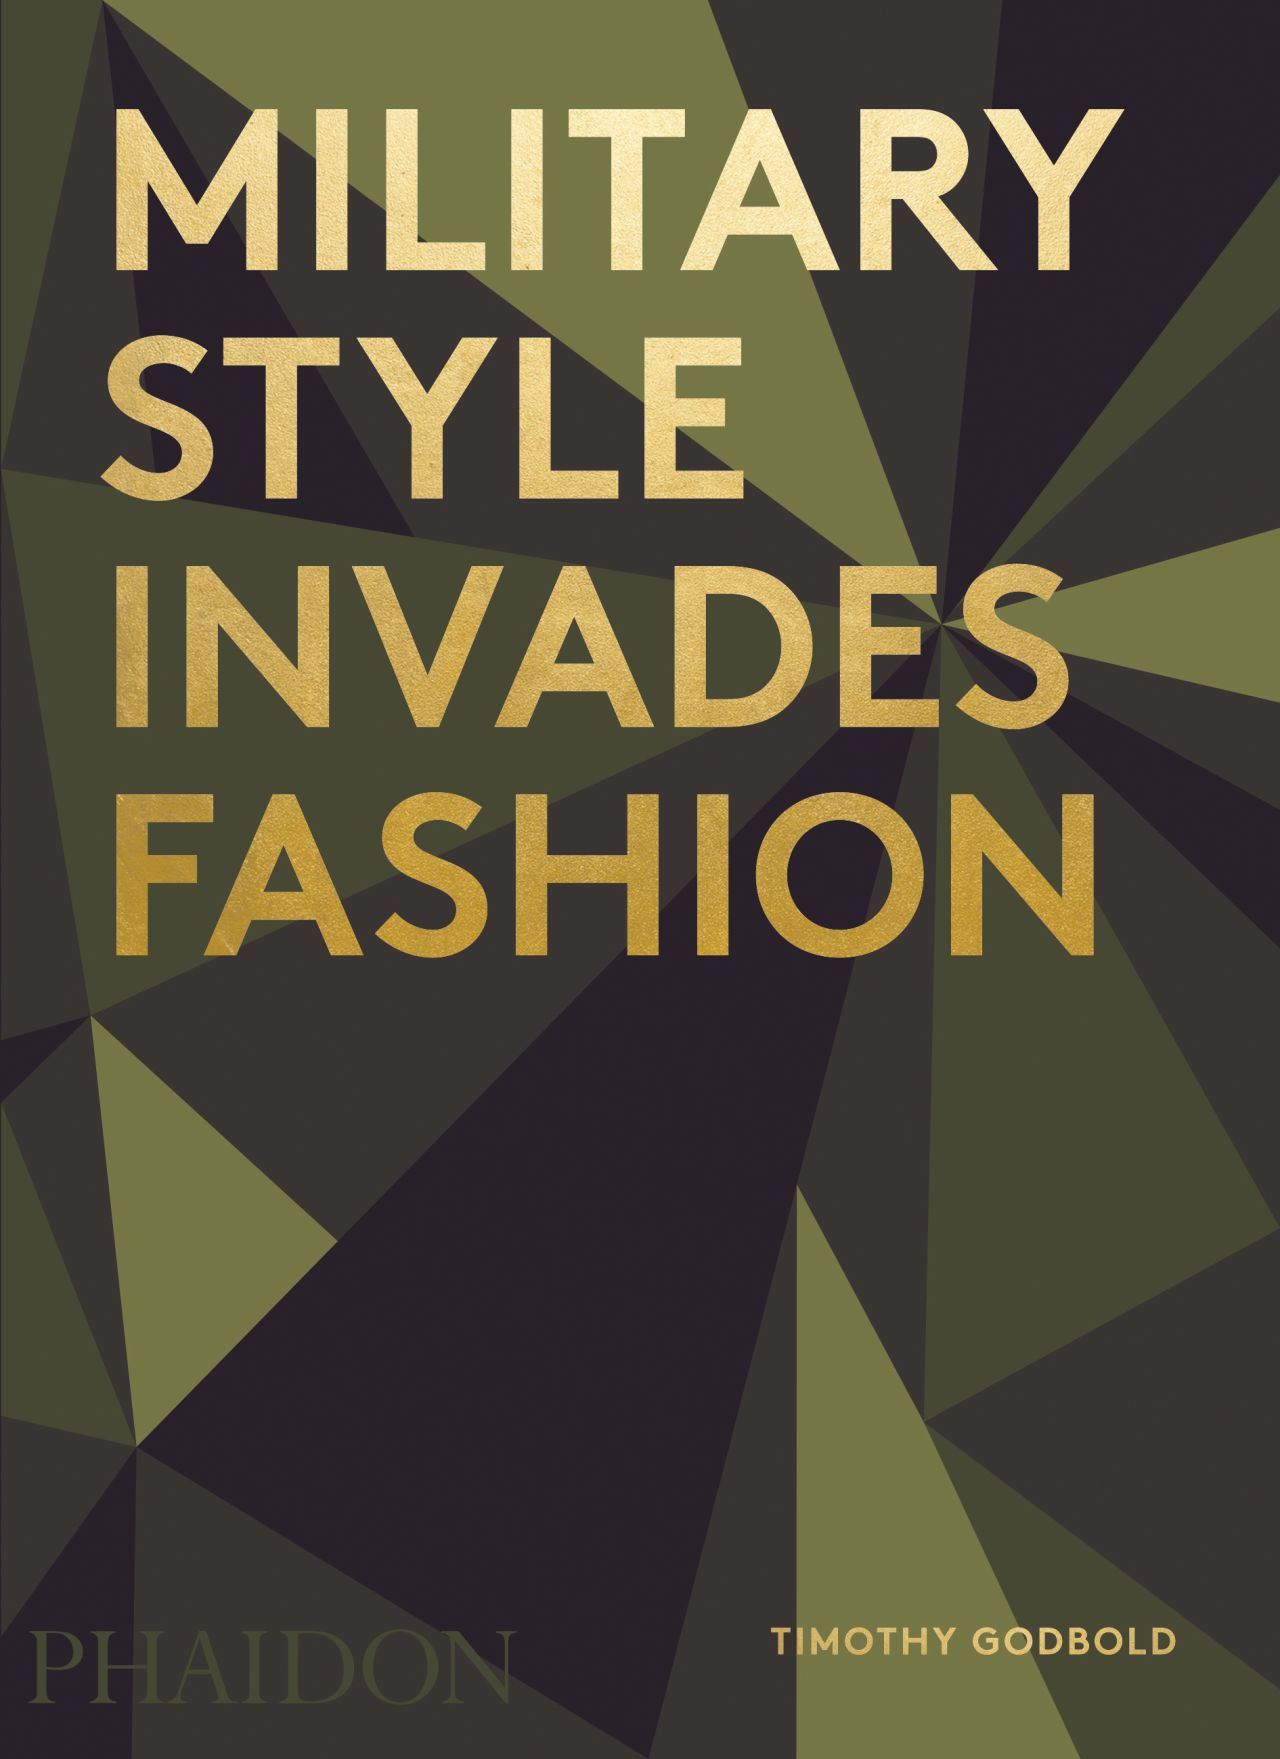 "Military Style Invades Fashion" by Timothy Godbold